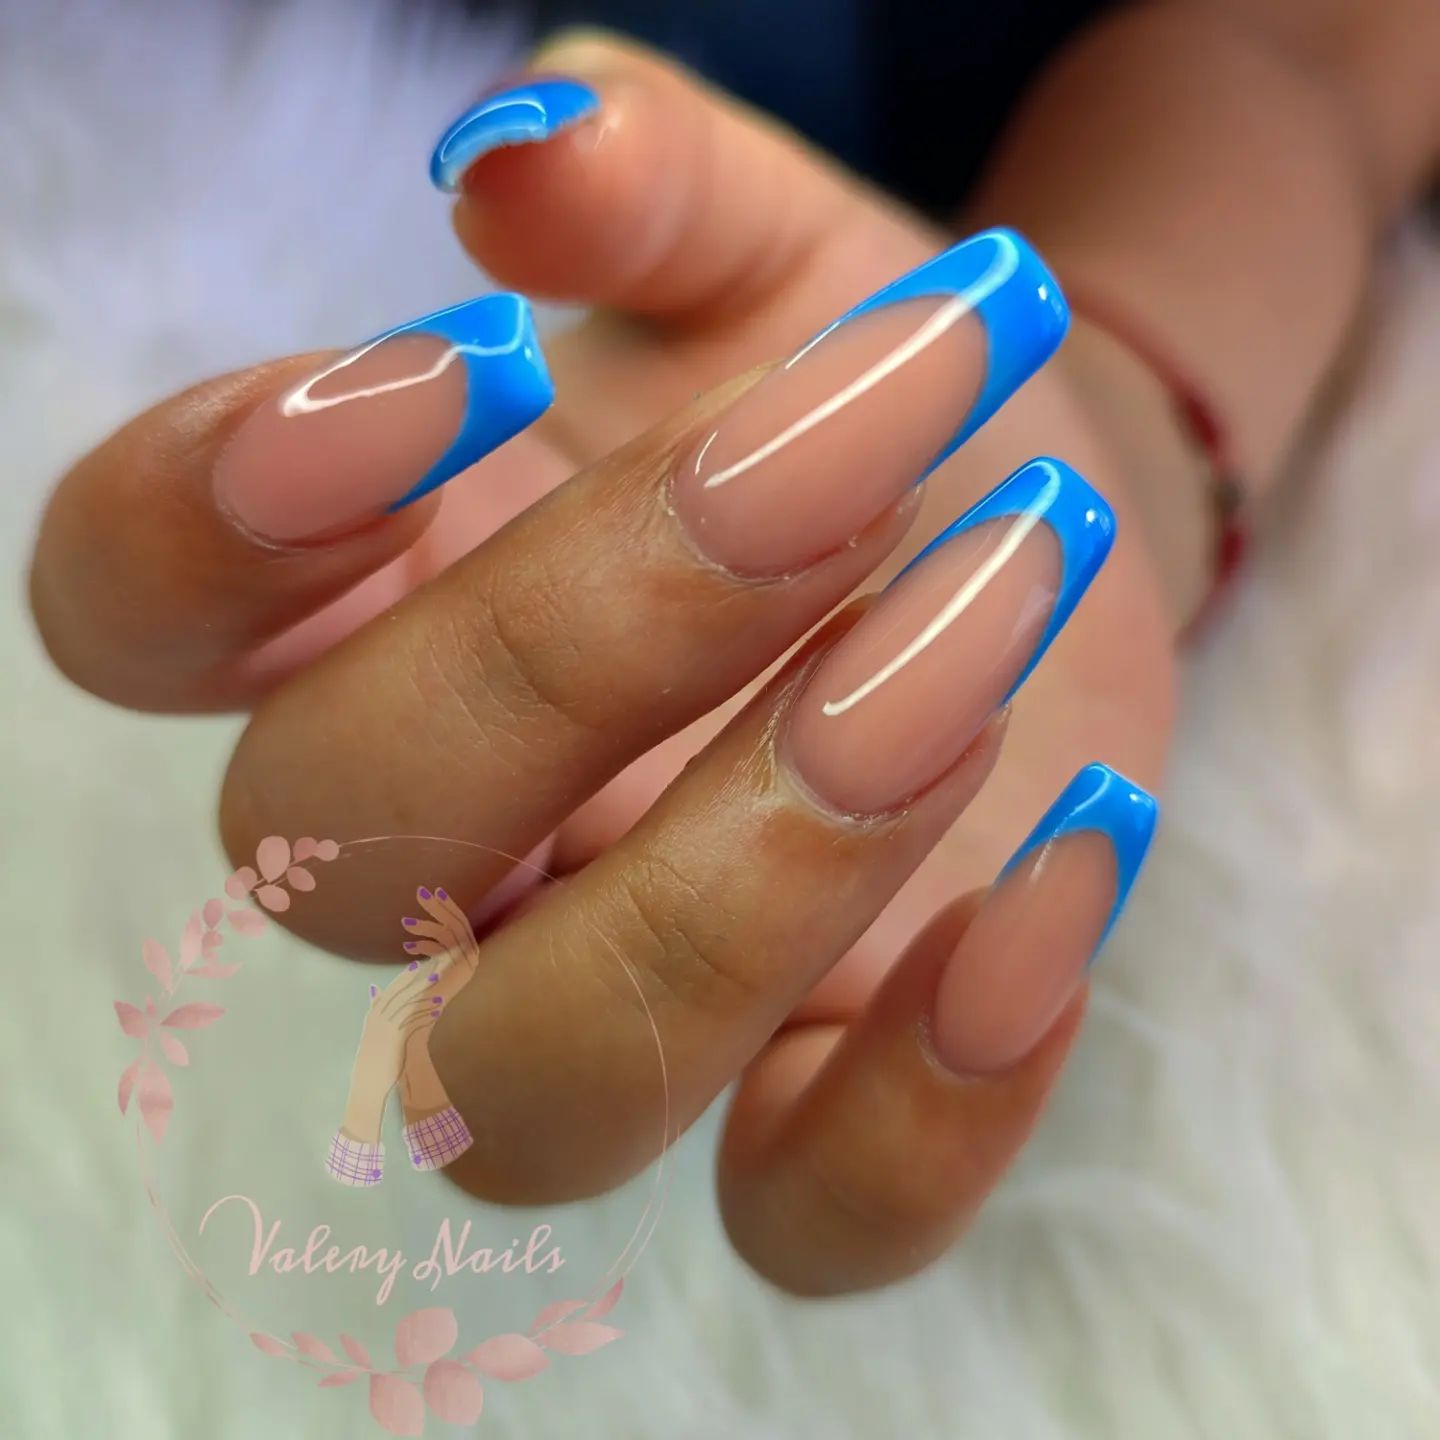 Long and sleek, this light blue French manicure is for women who enjoy soft options and subtle color transformations.